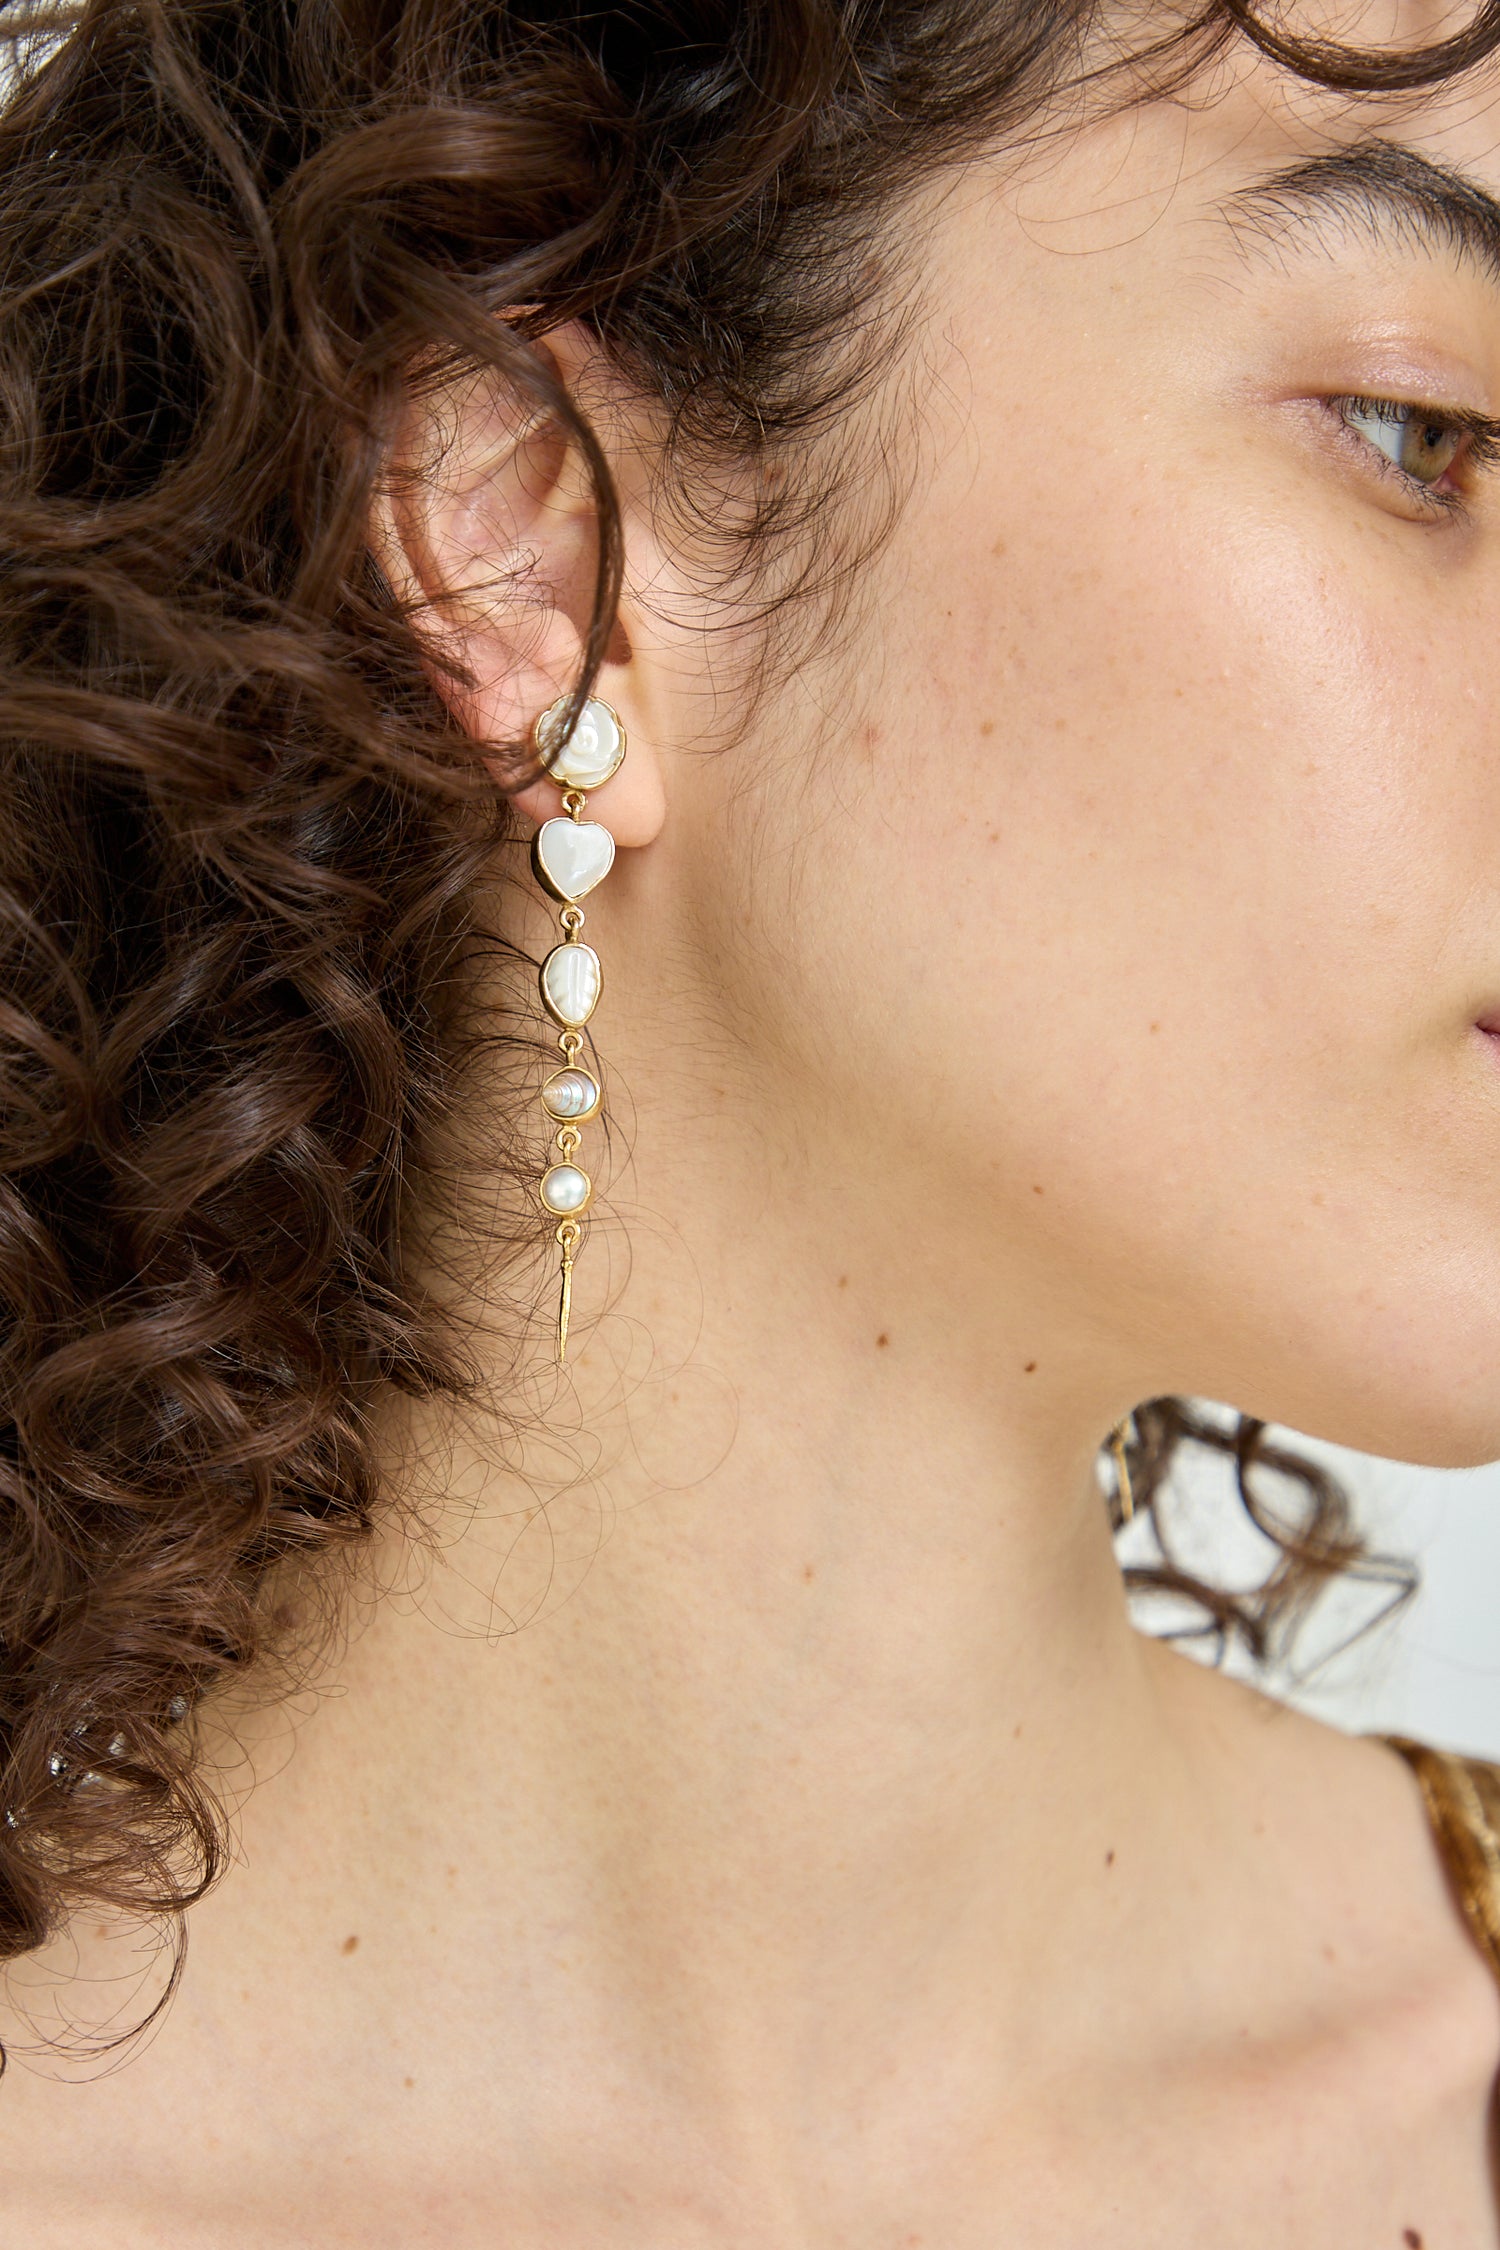 The model is wearing a pair of Five Charm with Victorian Drop Earrings from Grainne Morton.